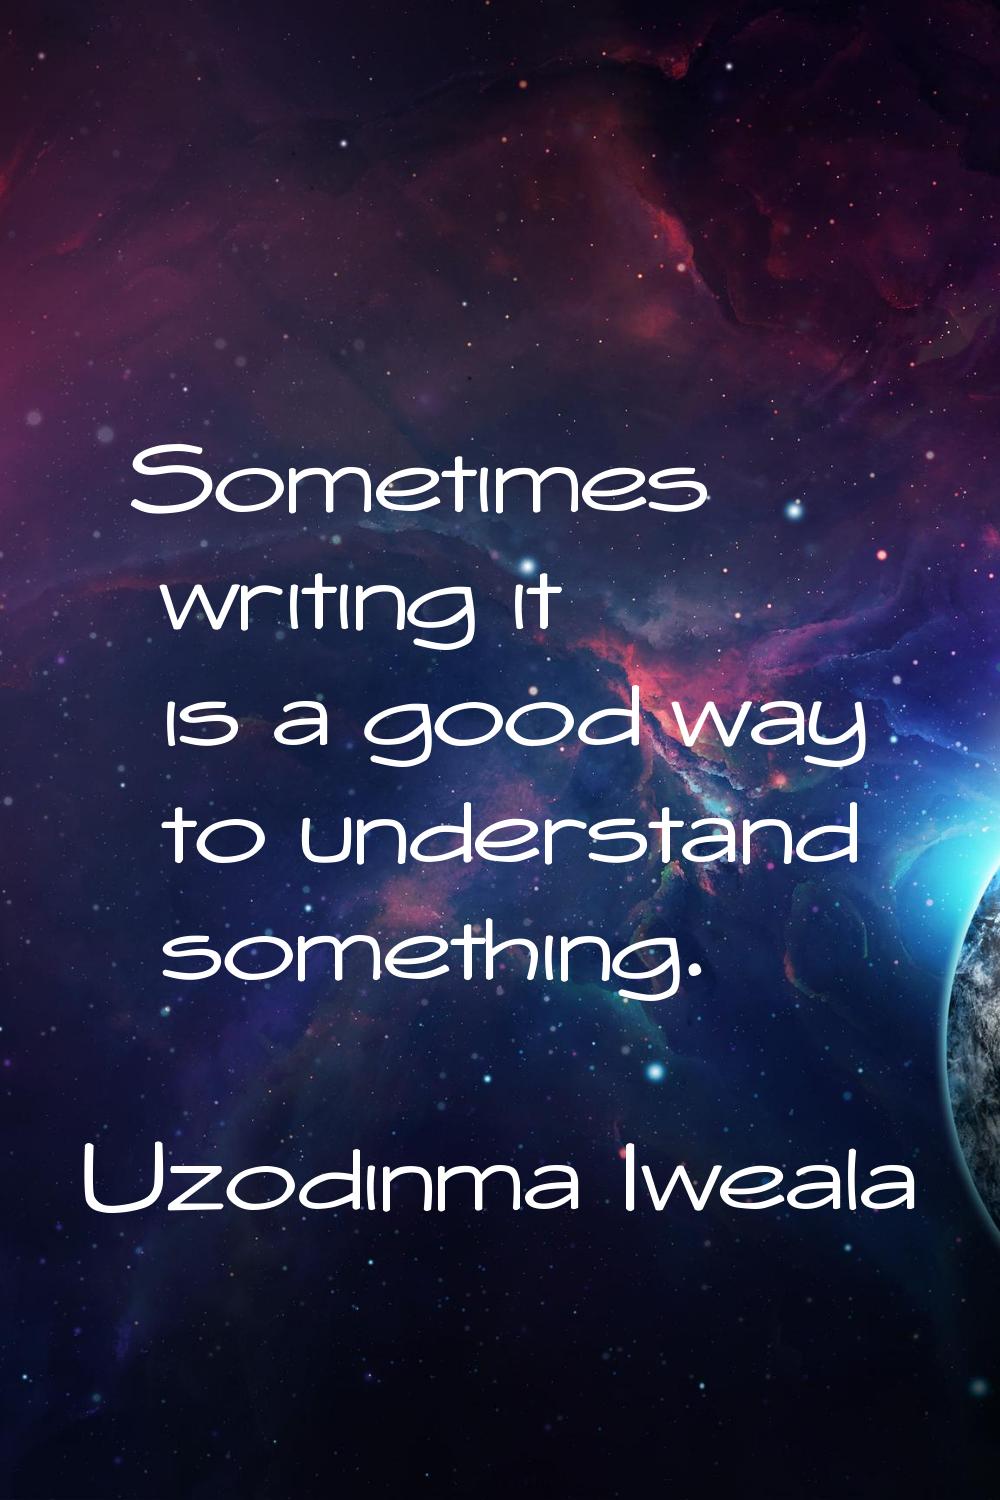 Sometimes writing it is a good way to understand something.